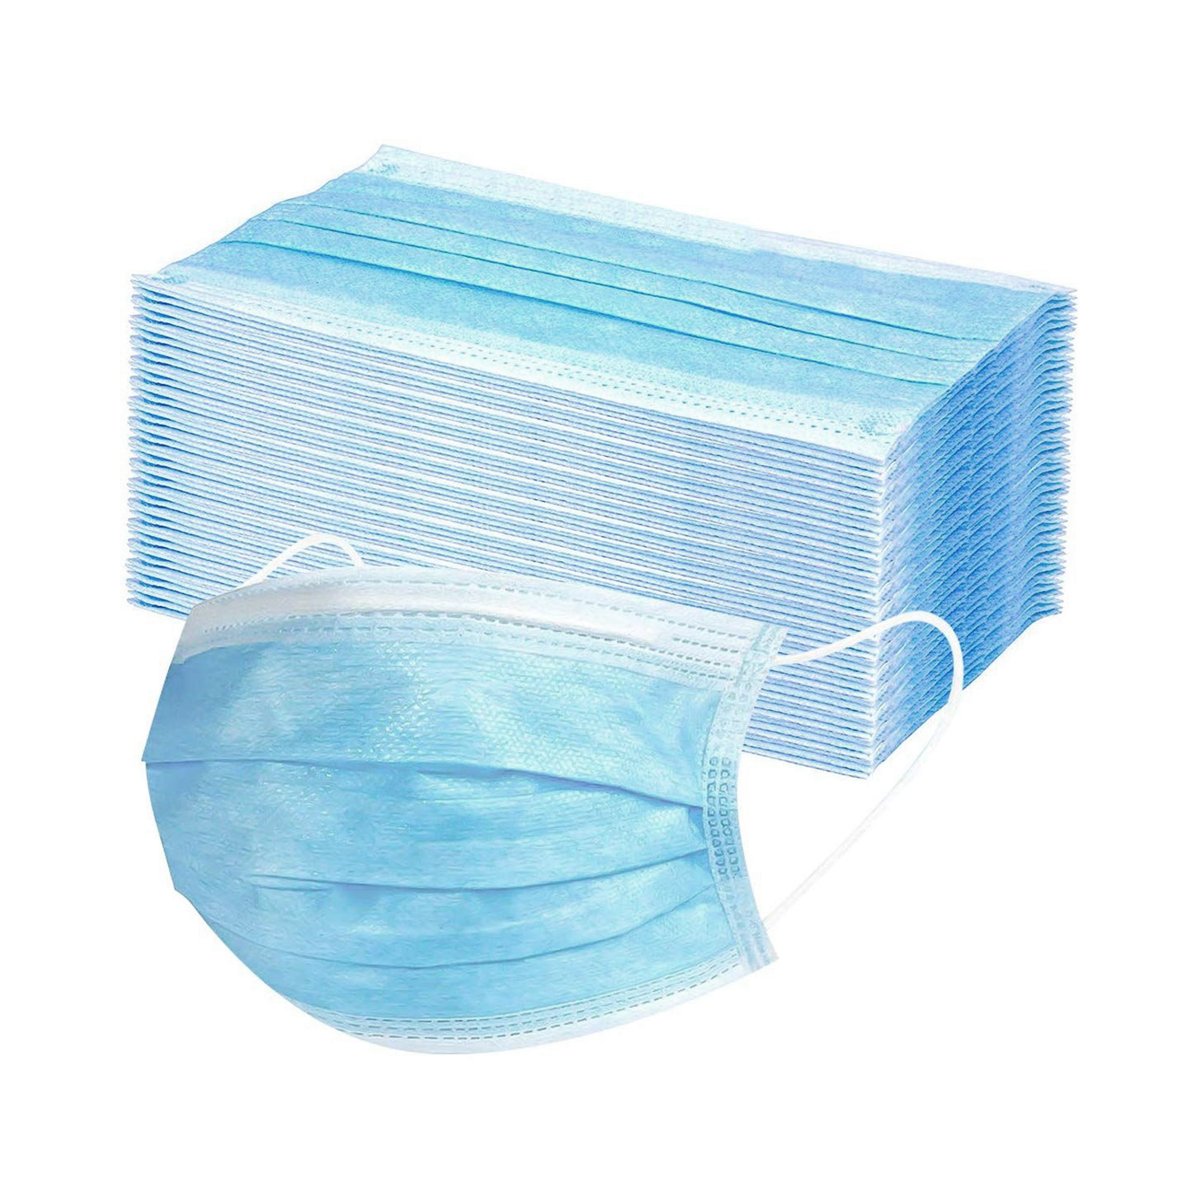 Disposable Protective Face Masks | 3 Ply - Blue - 50 Count - 2